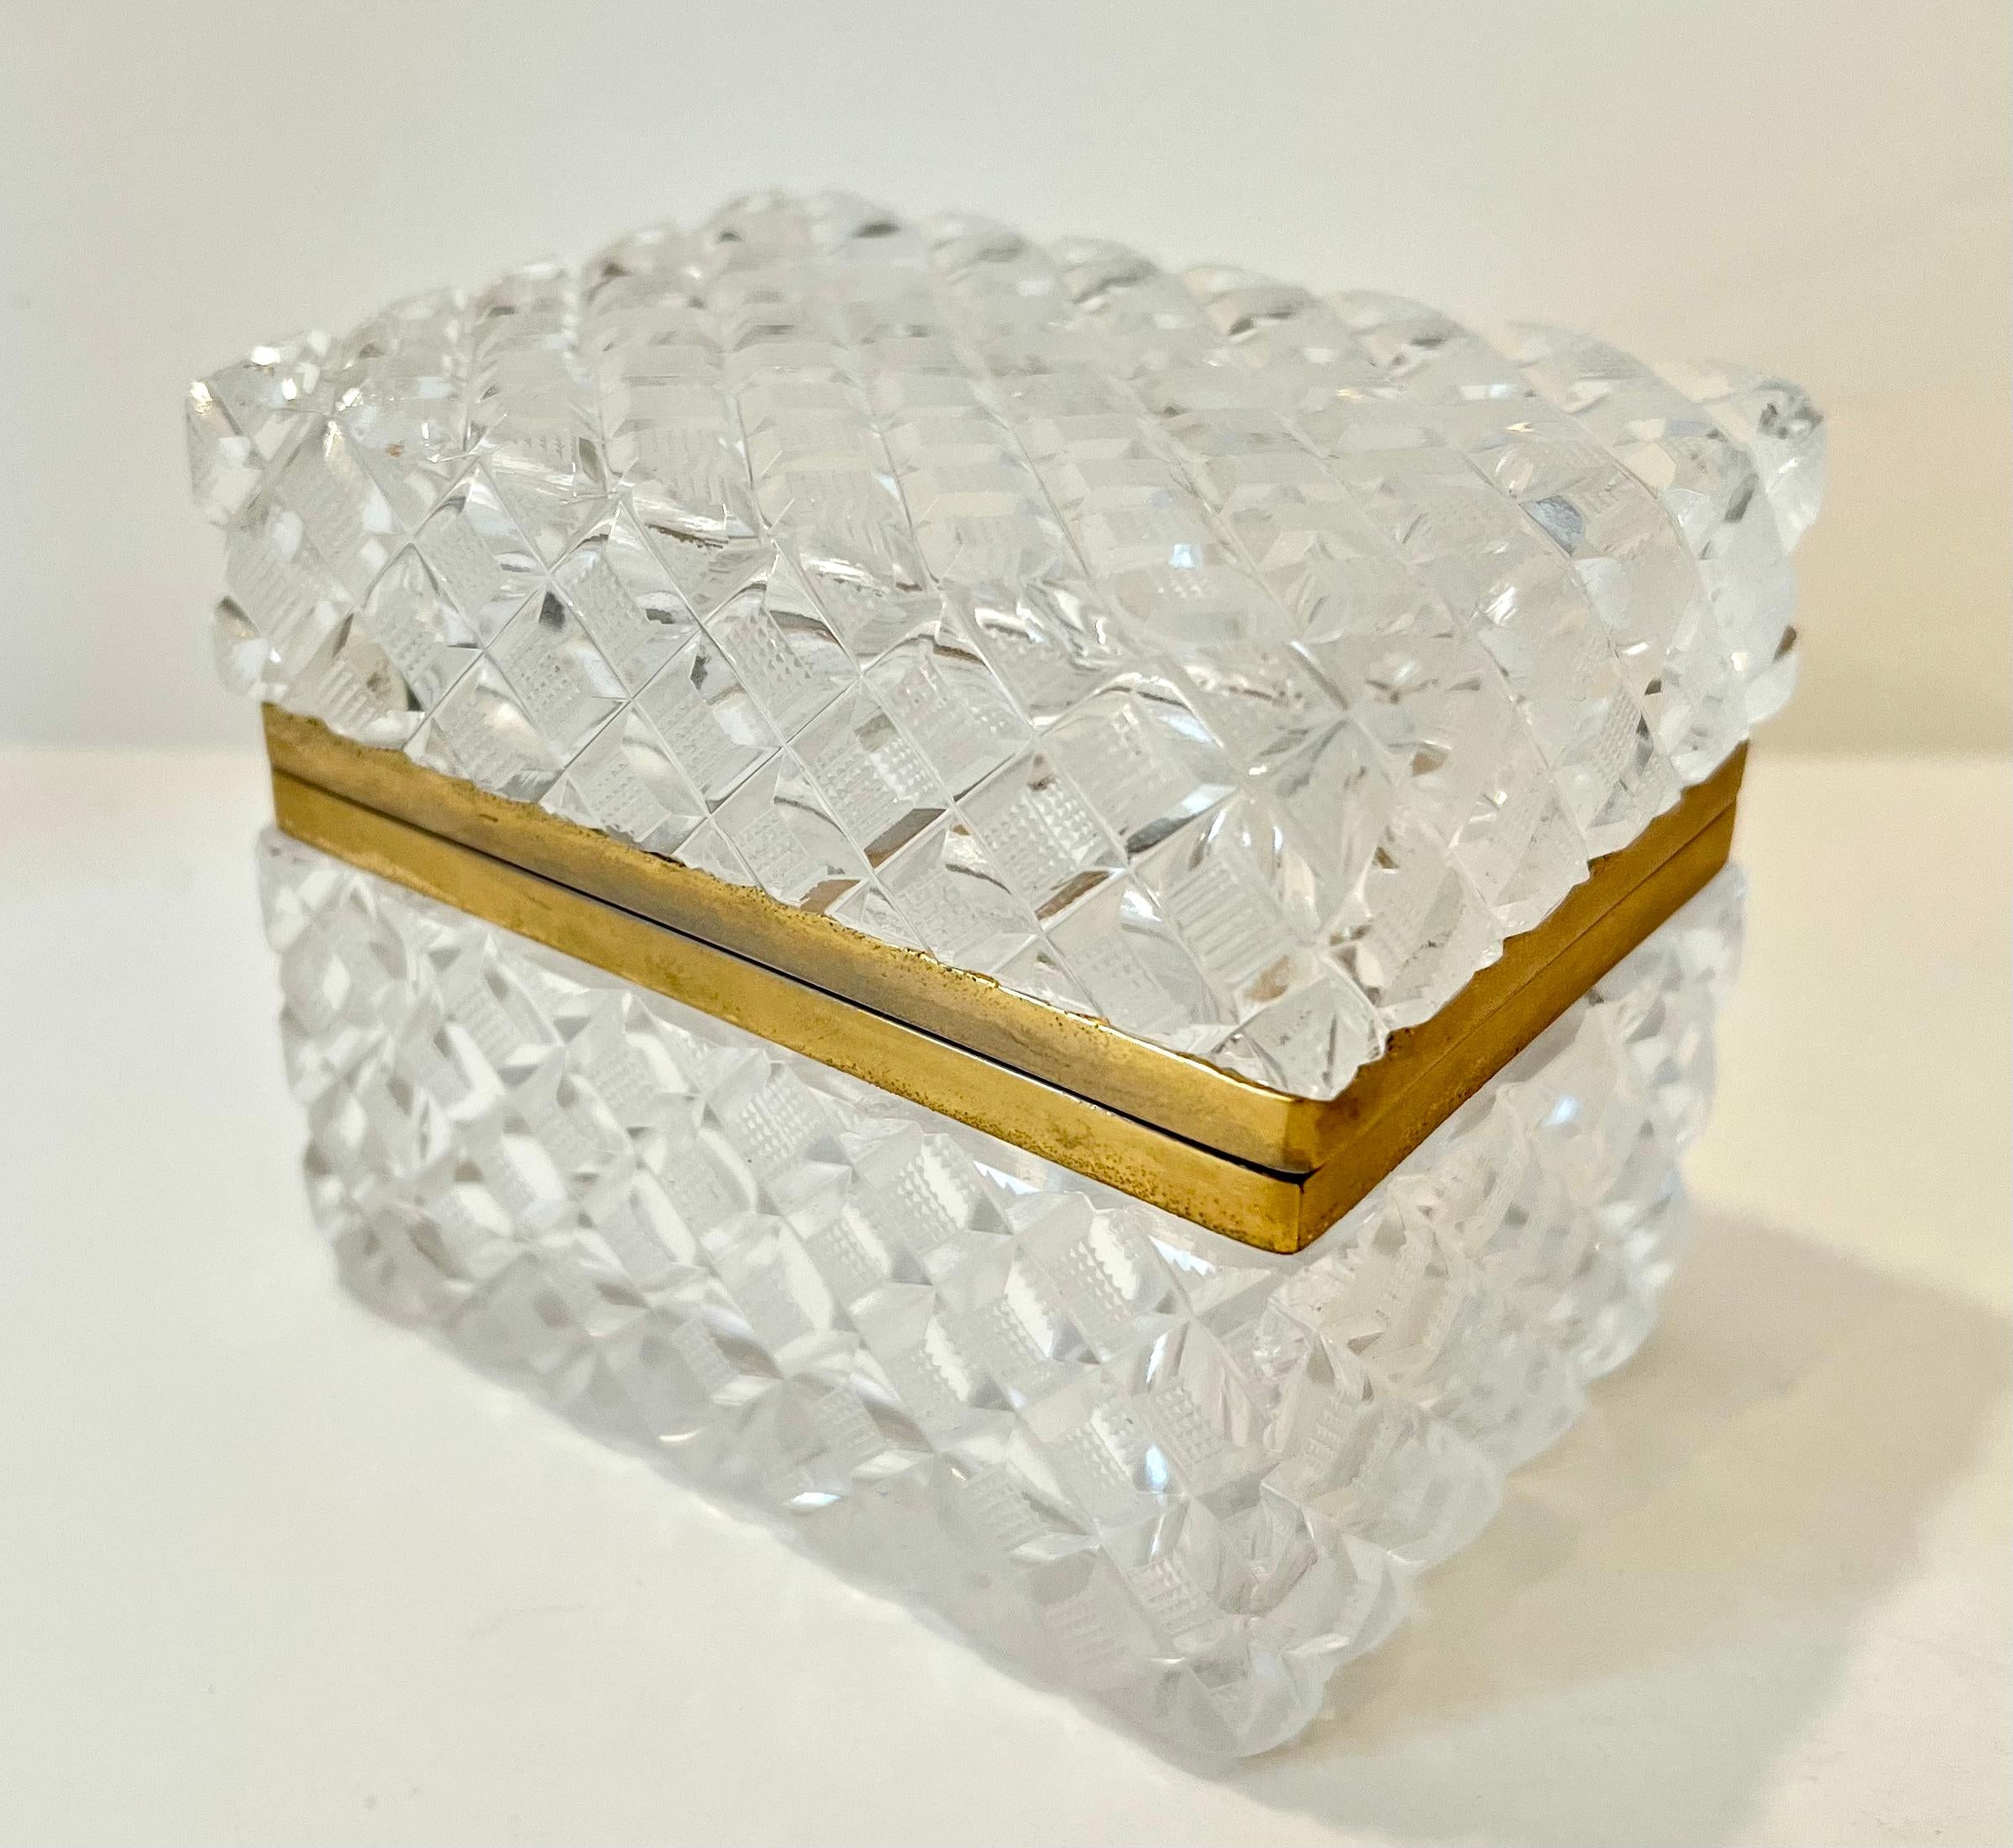 A crystal lidded box - rectangular with cut squares and textured surfaces.  A compliment to any cocktail table, work station or desk. 

Many purposes - also great in the bath as a cotton ball holder.  chic and sophisticated.